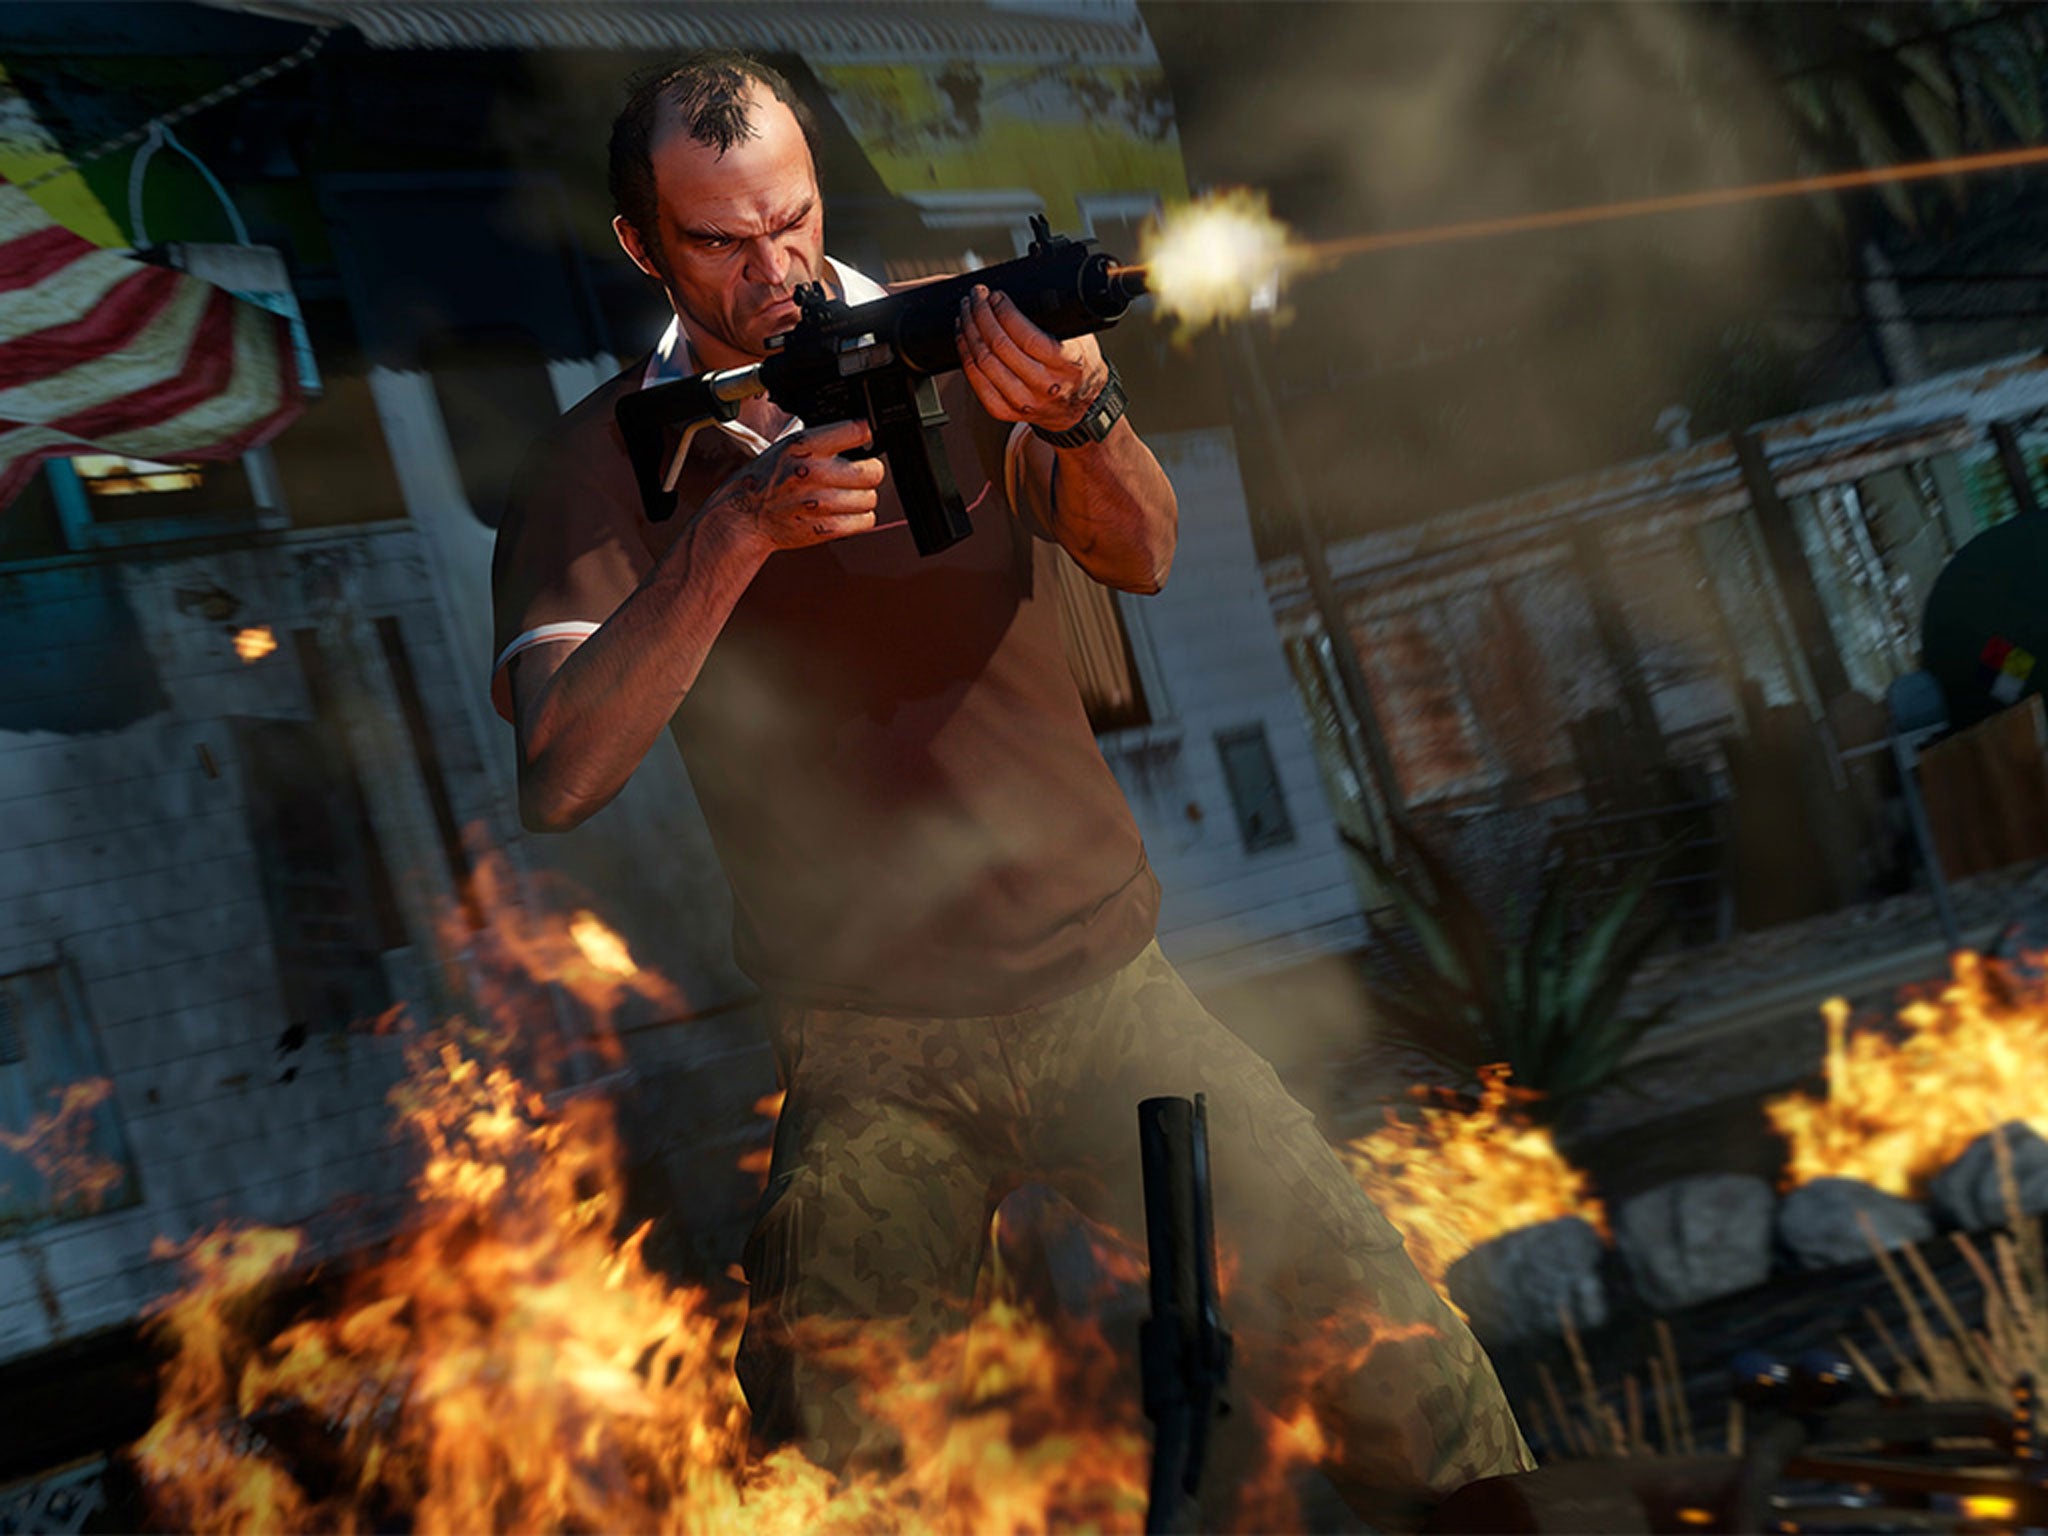 Grand Theft Auto V is being touted as the definitive version